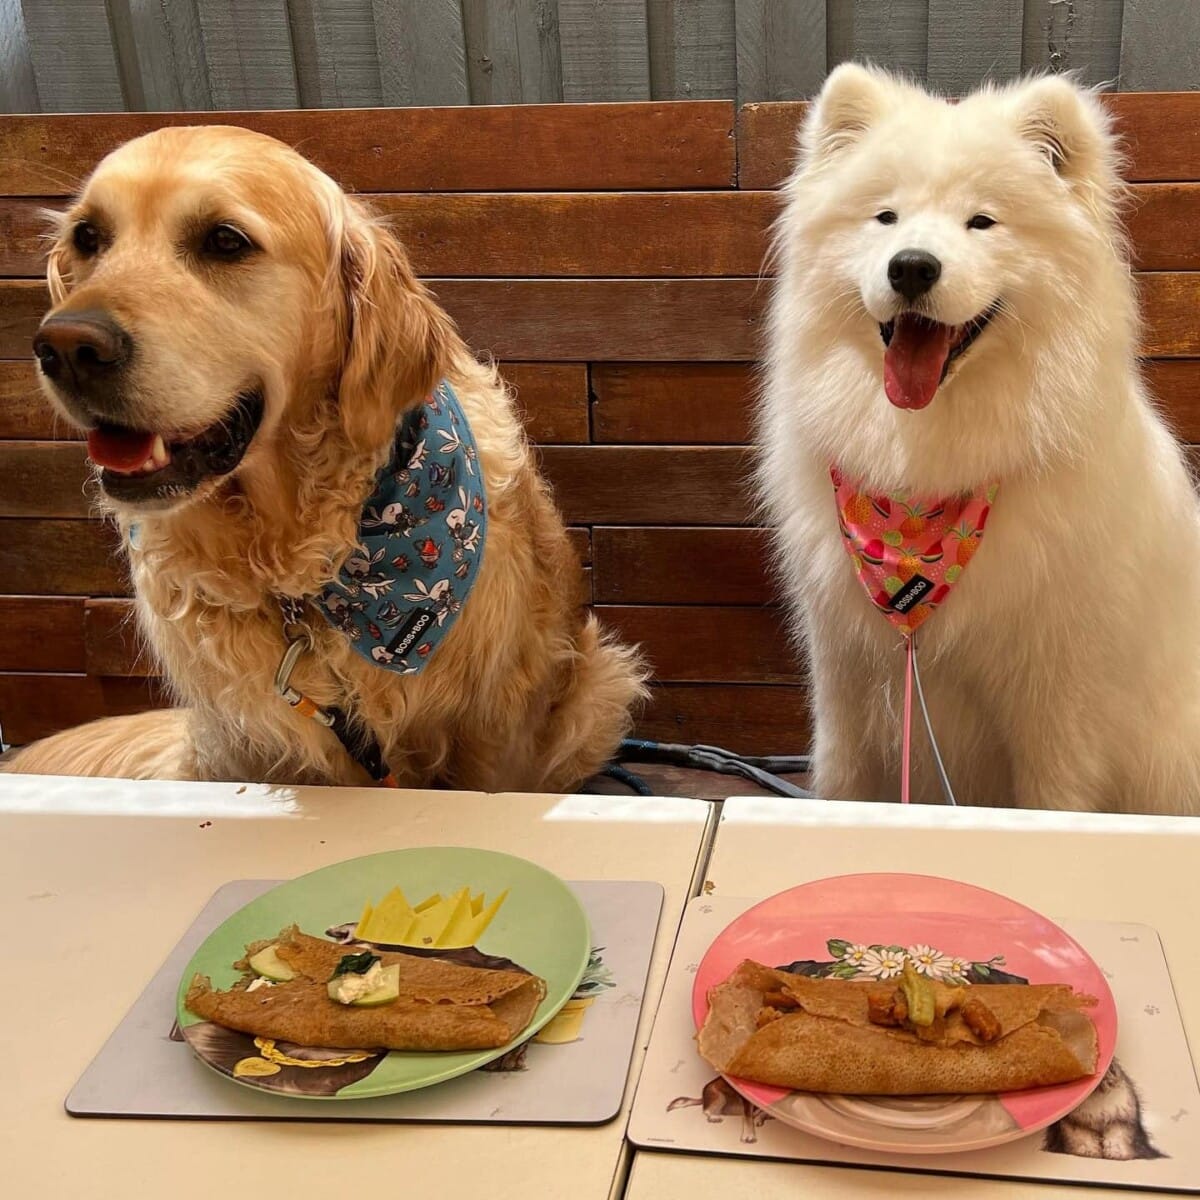 Two furry friends about to munch on delicious food from the dog menu at their local dog-friendly cafe in Melbourne. The perfect spot for some quality pup time!